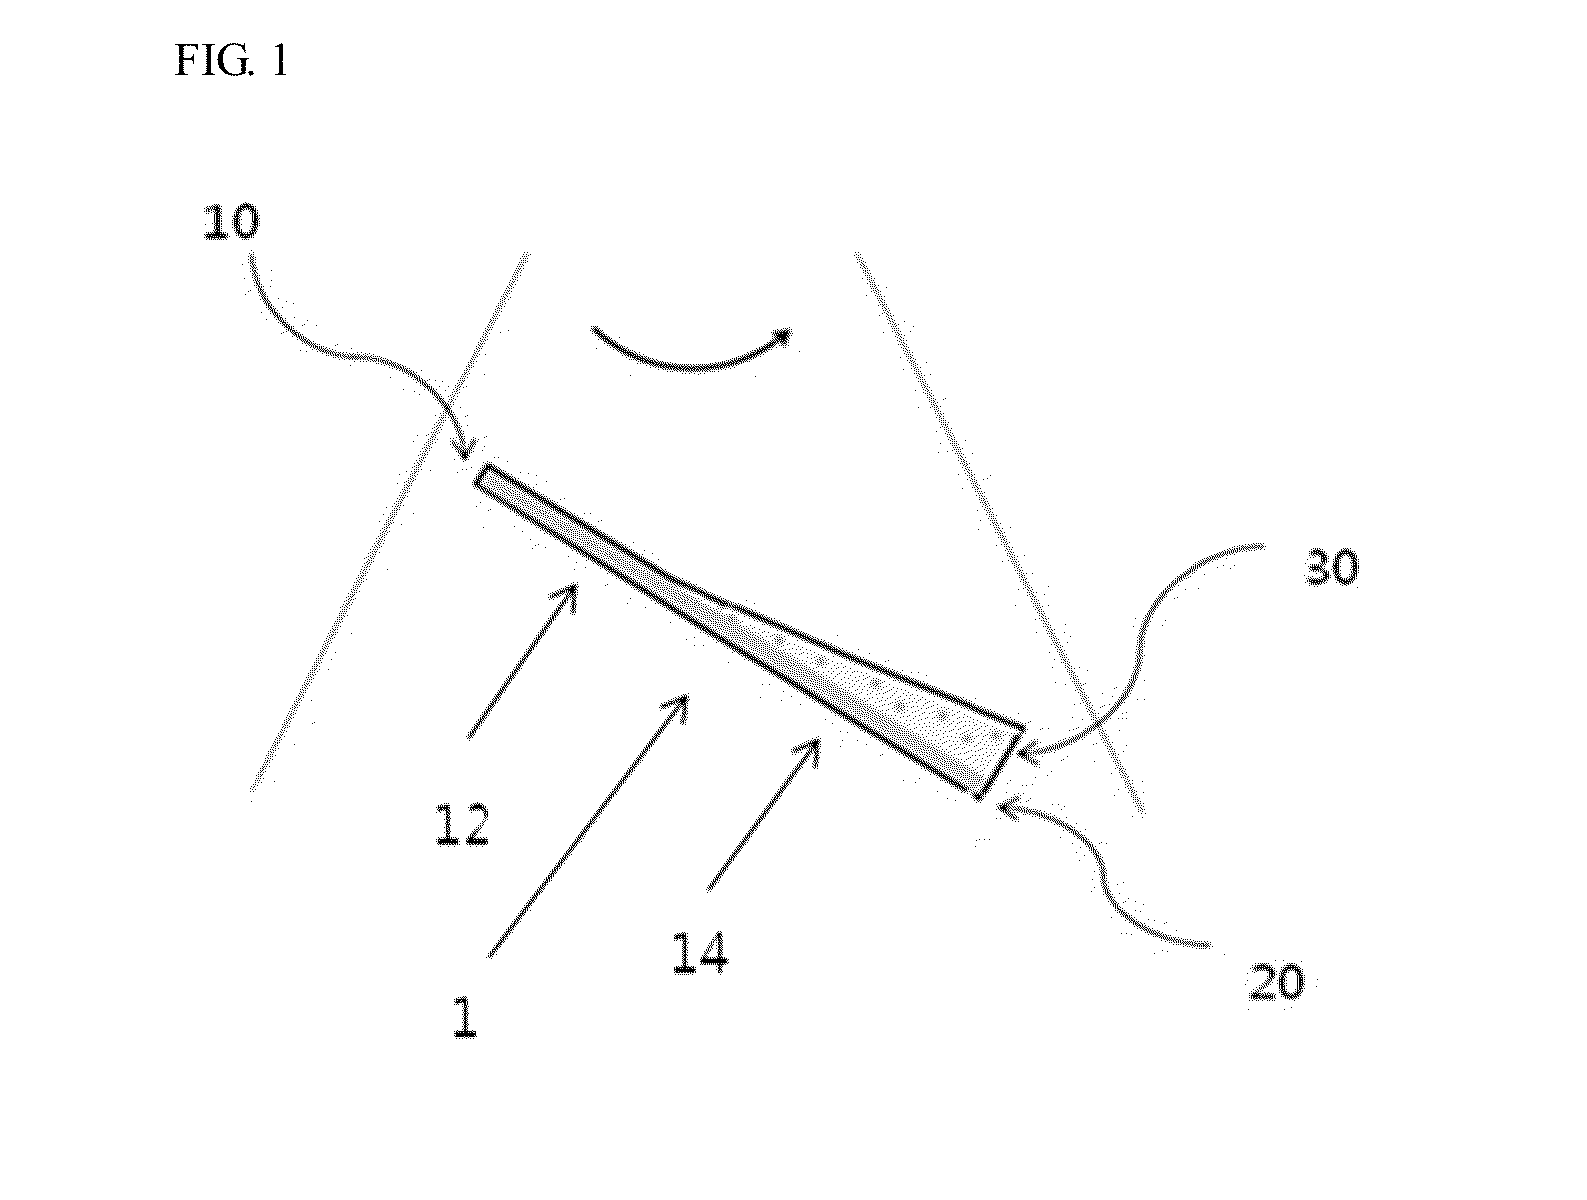 Microfluidic channel for removing bubbles in fluid